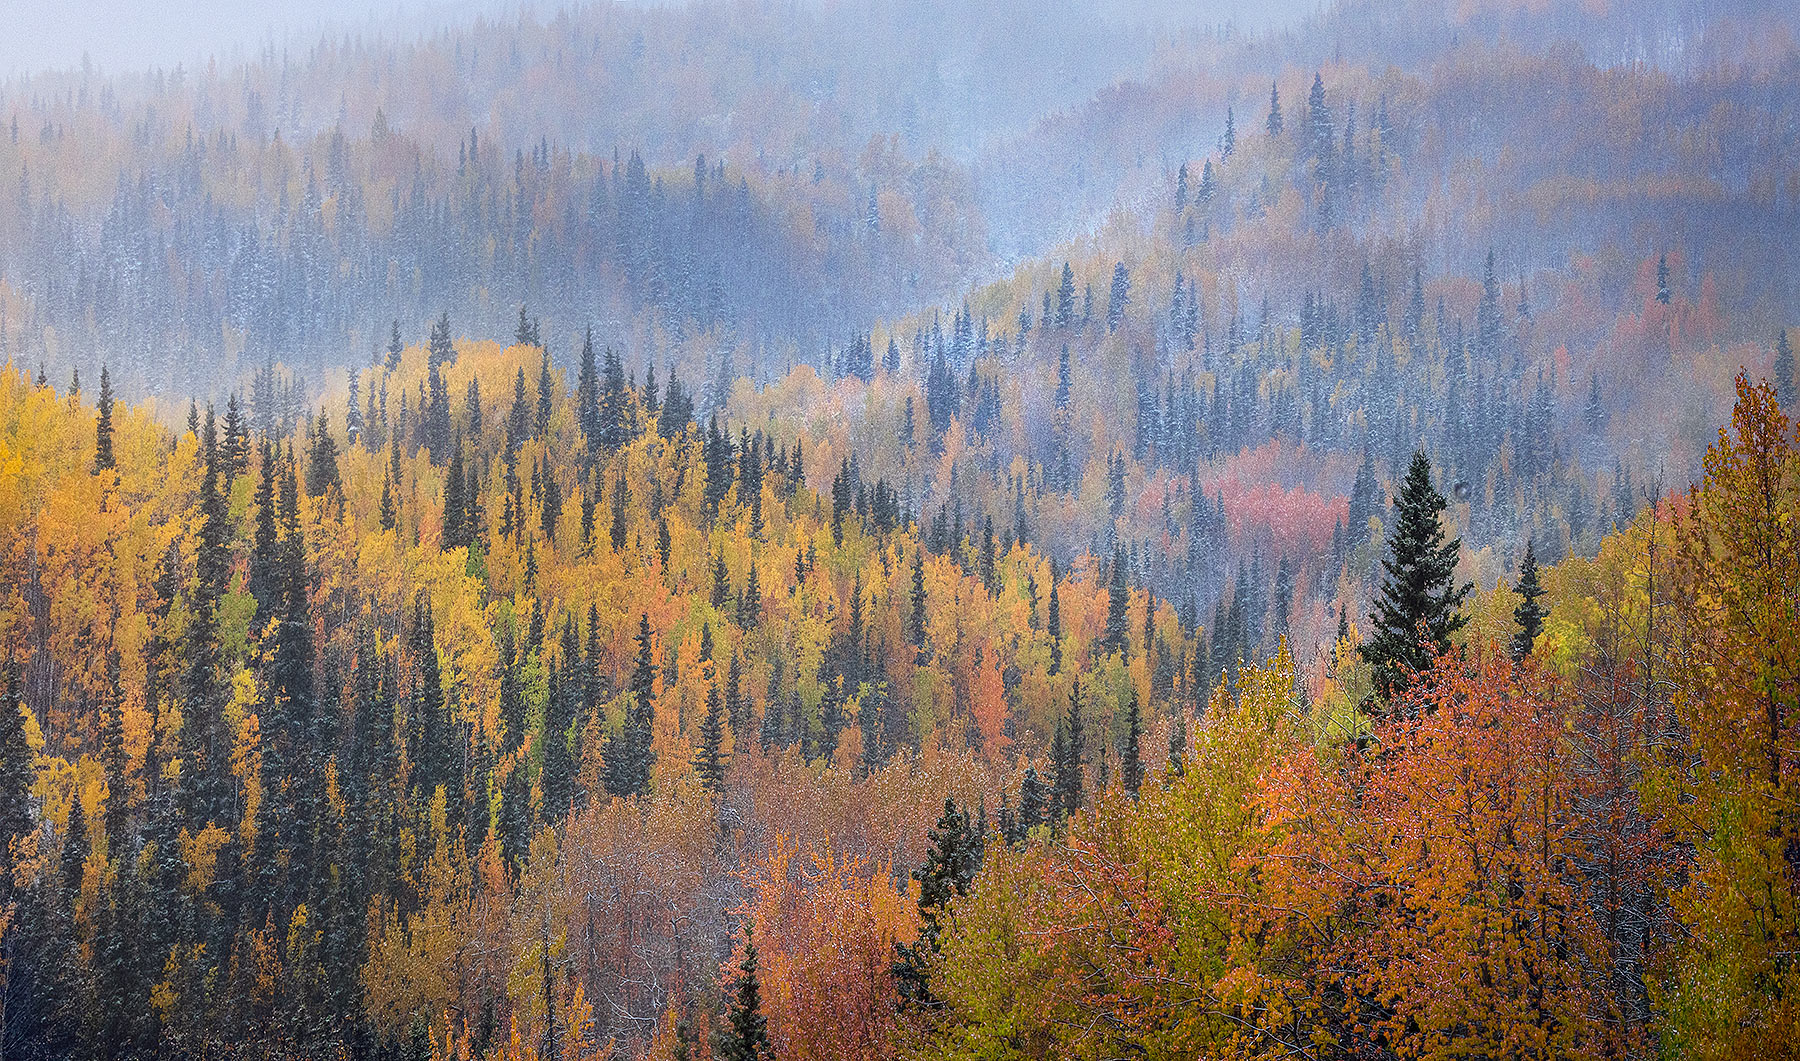 The first snow comes to the autumn forest in the Chugach Range, Alaska